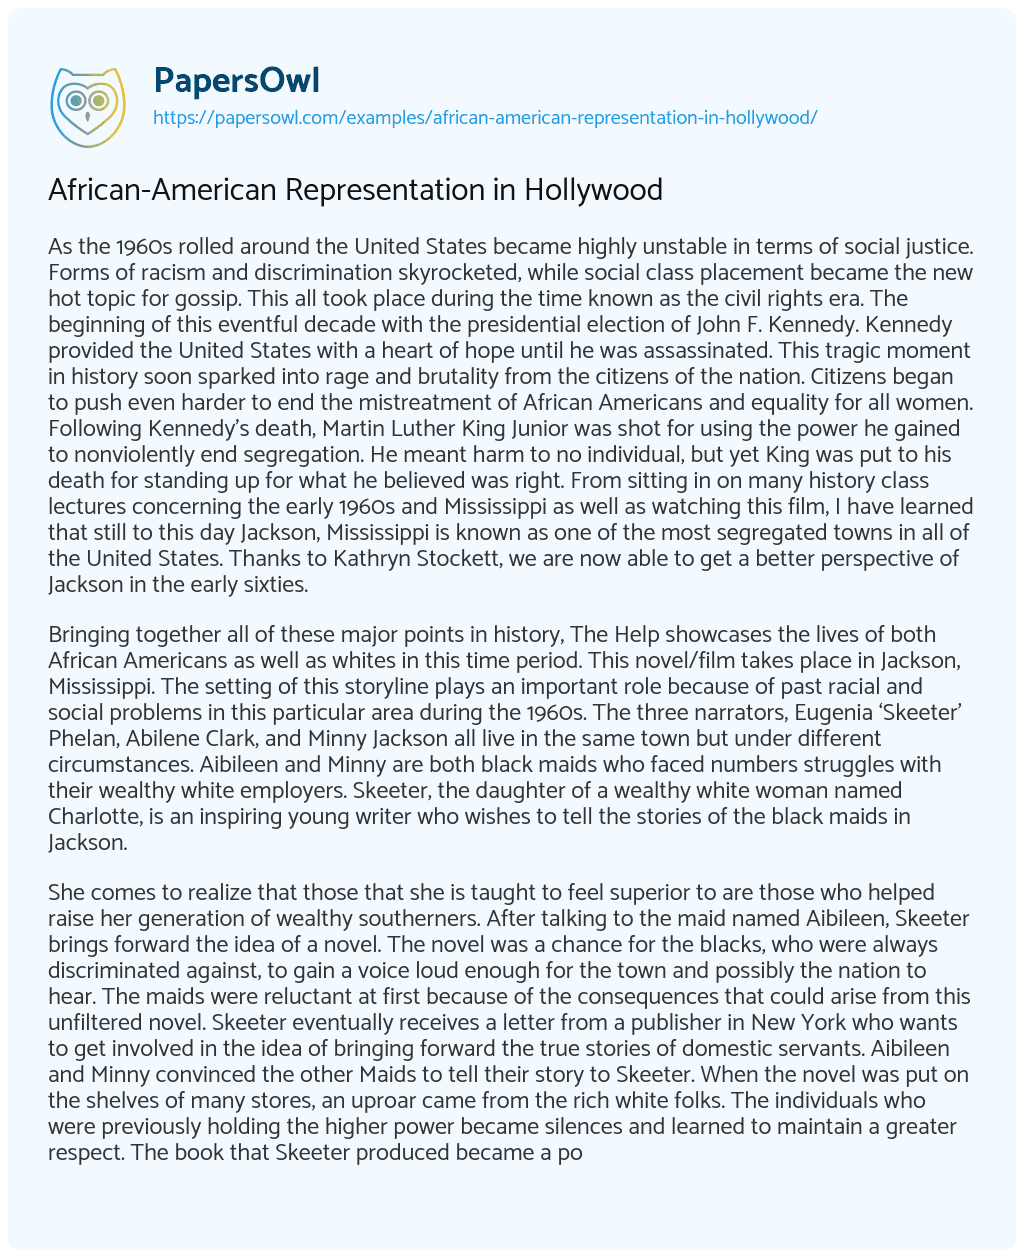 Essay on African-American Representation in Hollywood